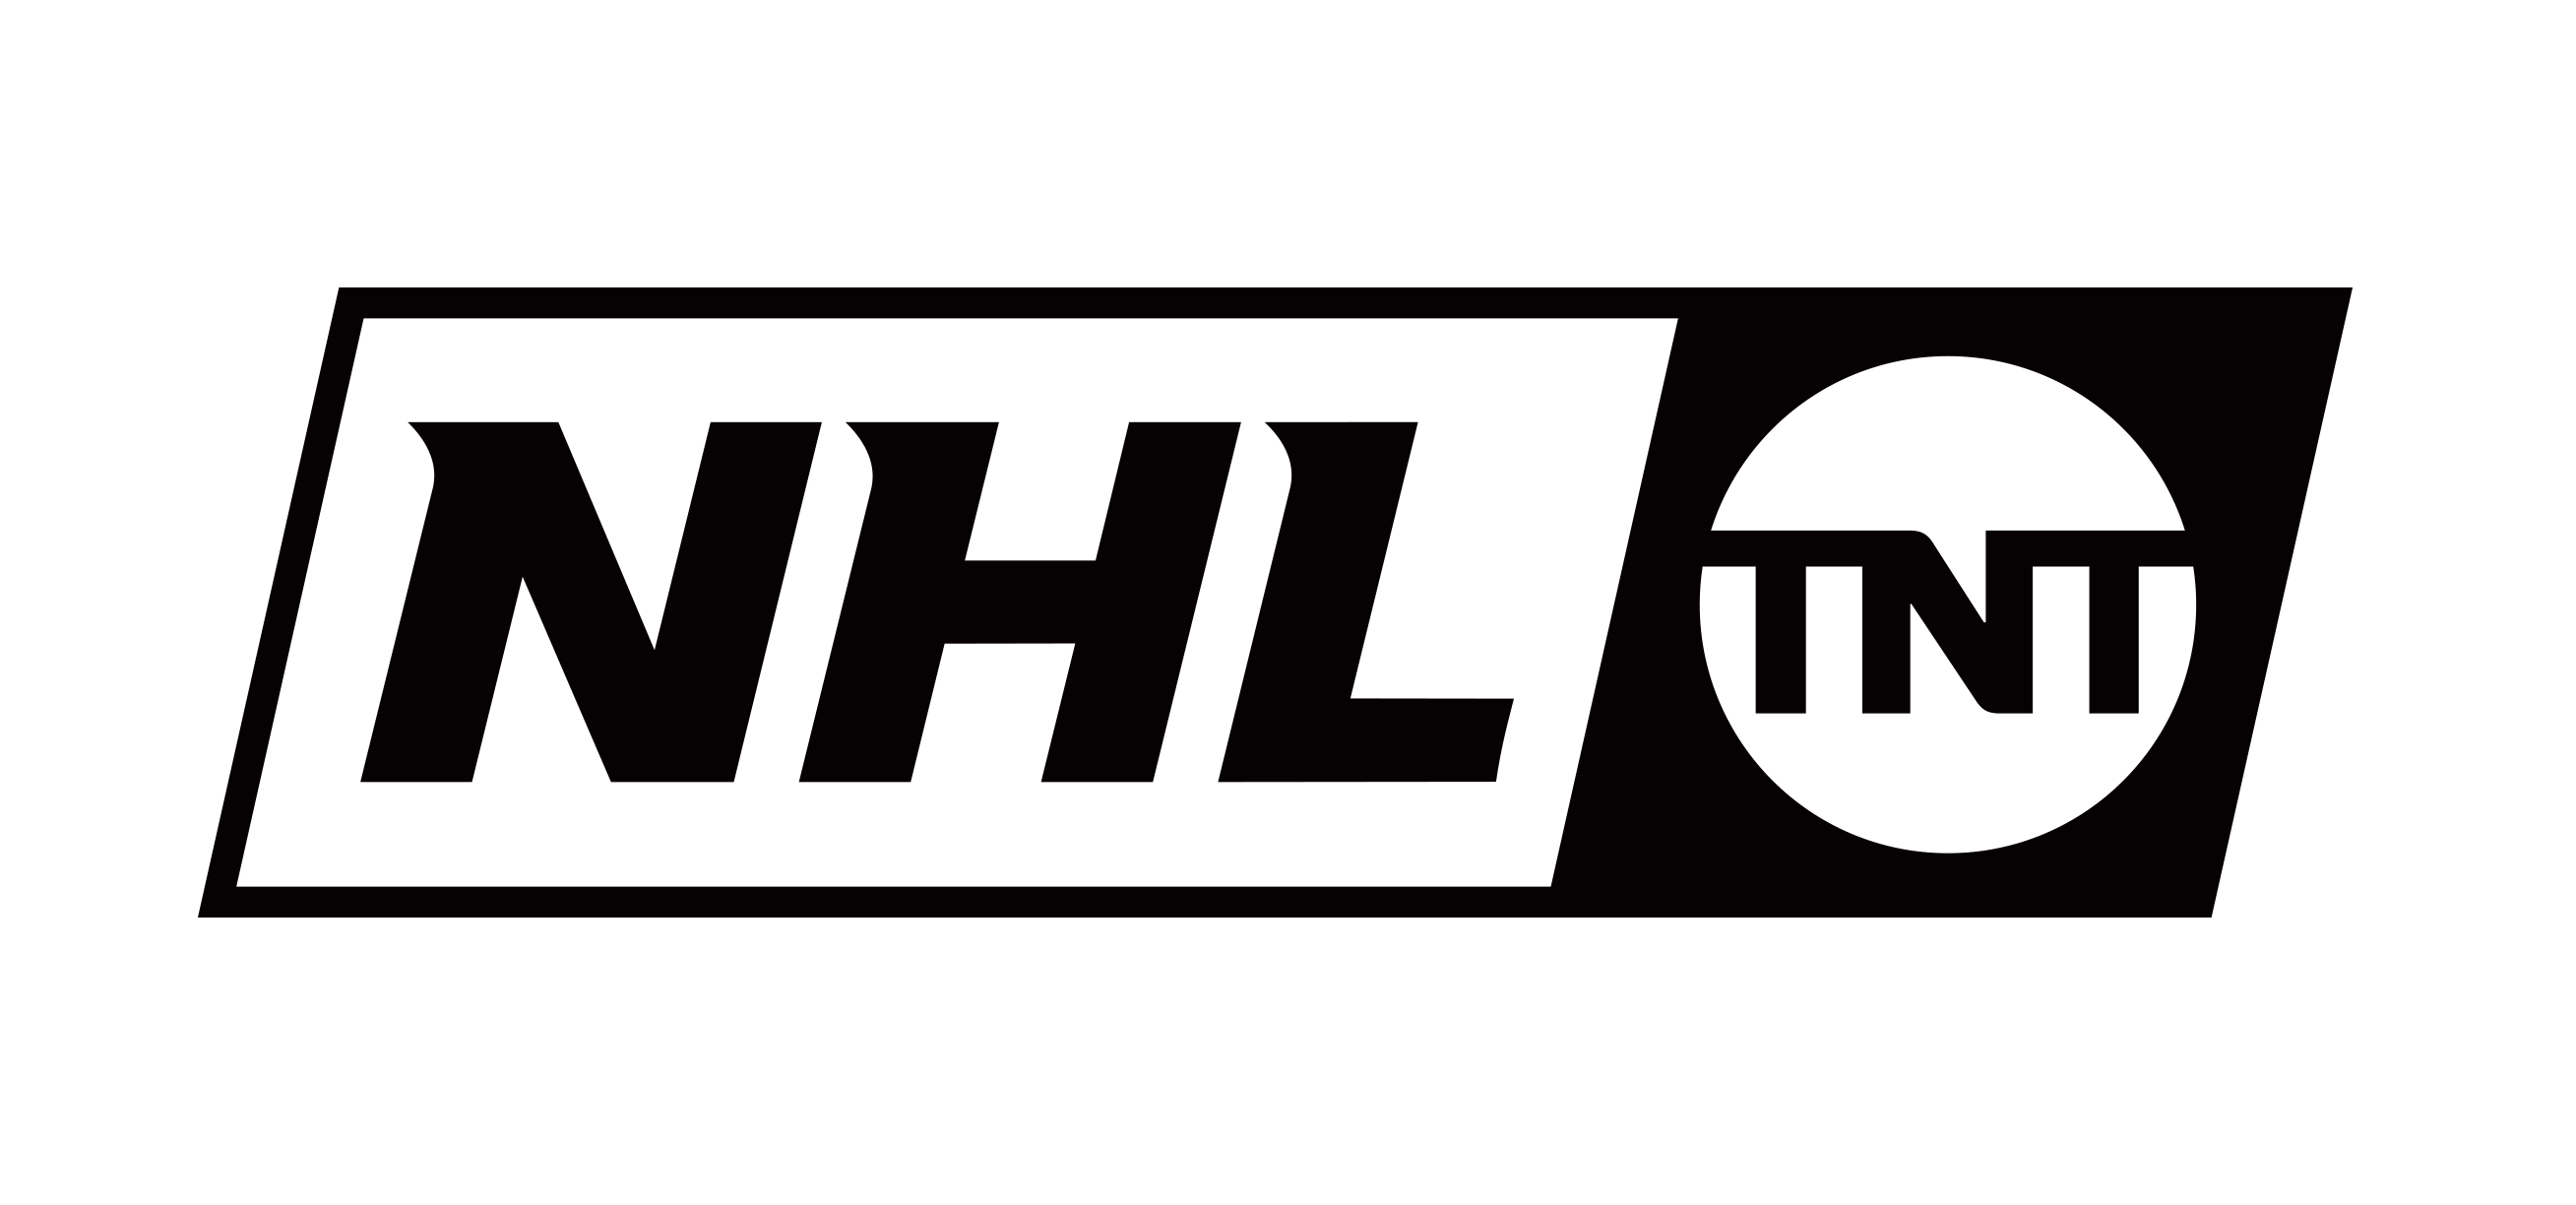 ESPN, Turner Sports To Drop the Puck in October To Begin Special NHL Seasons